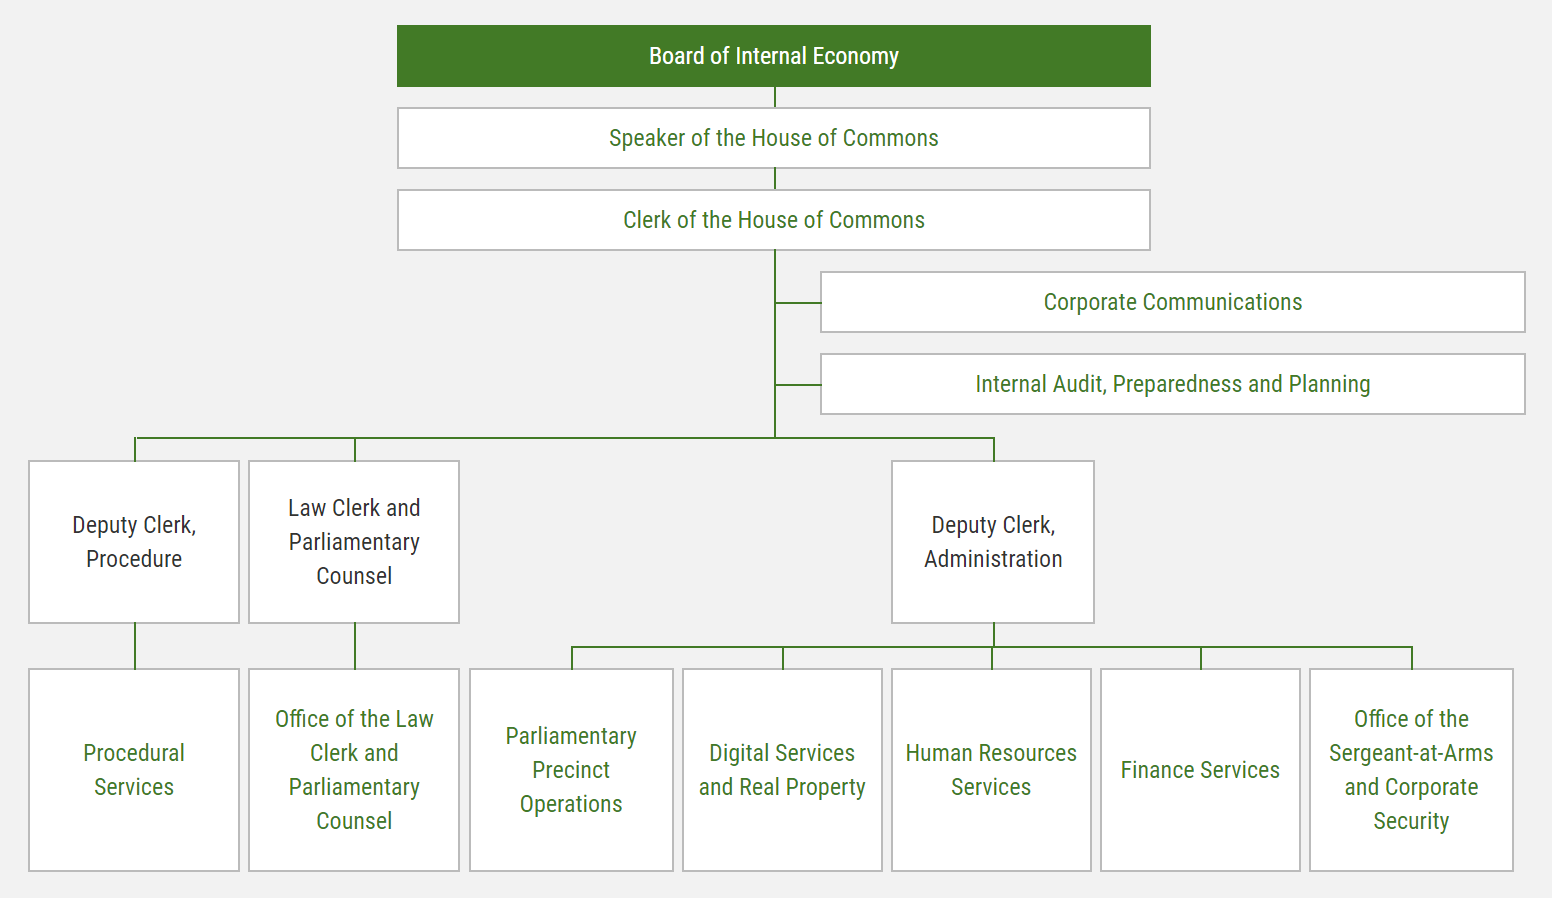 House Administration Organizational Chart, in hierarchical order and scrolling one below the other, in rectangles: Board of Internal Economy, Speaker of the House of Commons, and Clerk of the House of Commons. Under Clerk of the House of Commons: Corporate Communications, Internal Audit, Preparedness and Planning, Deputy Clerk, Procedure, Law Clerk and Parliamentary Counsel, and Deputy Clerk, Administration. Under Deputy Clerk, Procedure: Procedural Services. Under Law Clerk and Parliamentary Counsel: Office of the Law Clerk and Parliamentary Counsel. Under Deputy Clerk, Administration: Parliamentary Precinct Operations, Digital Services and Real Property, Human Resources Services, Finance Services, and Office of the Sergeant-at-Arms and Corporate Security.